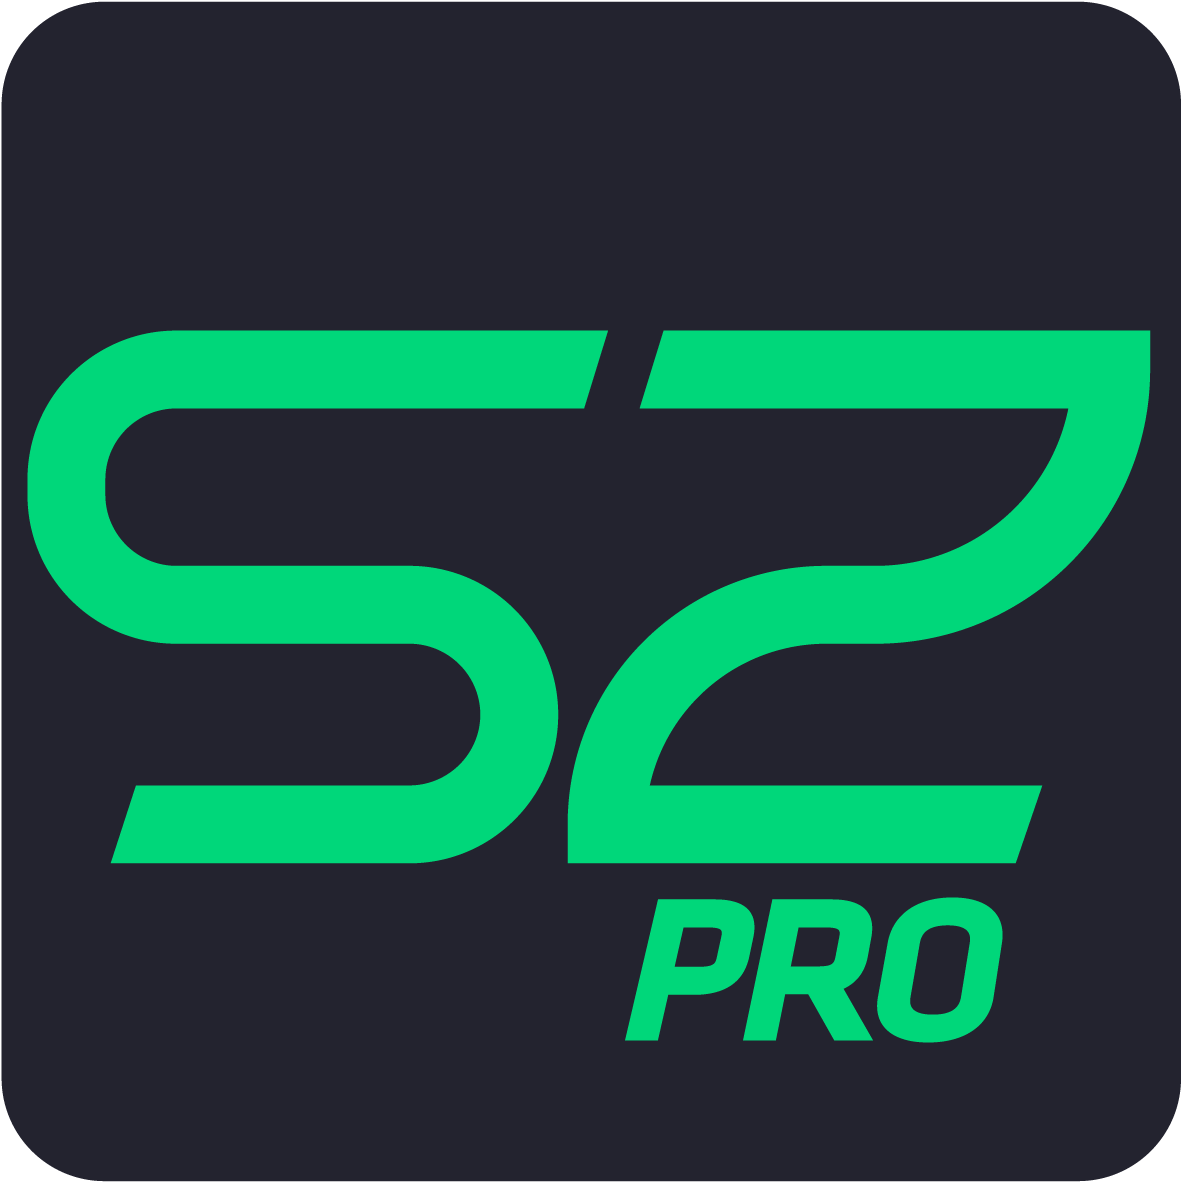 S2Pro - Your Health